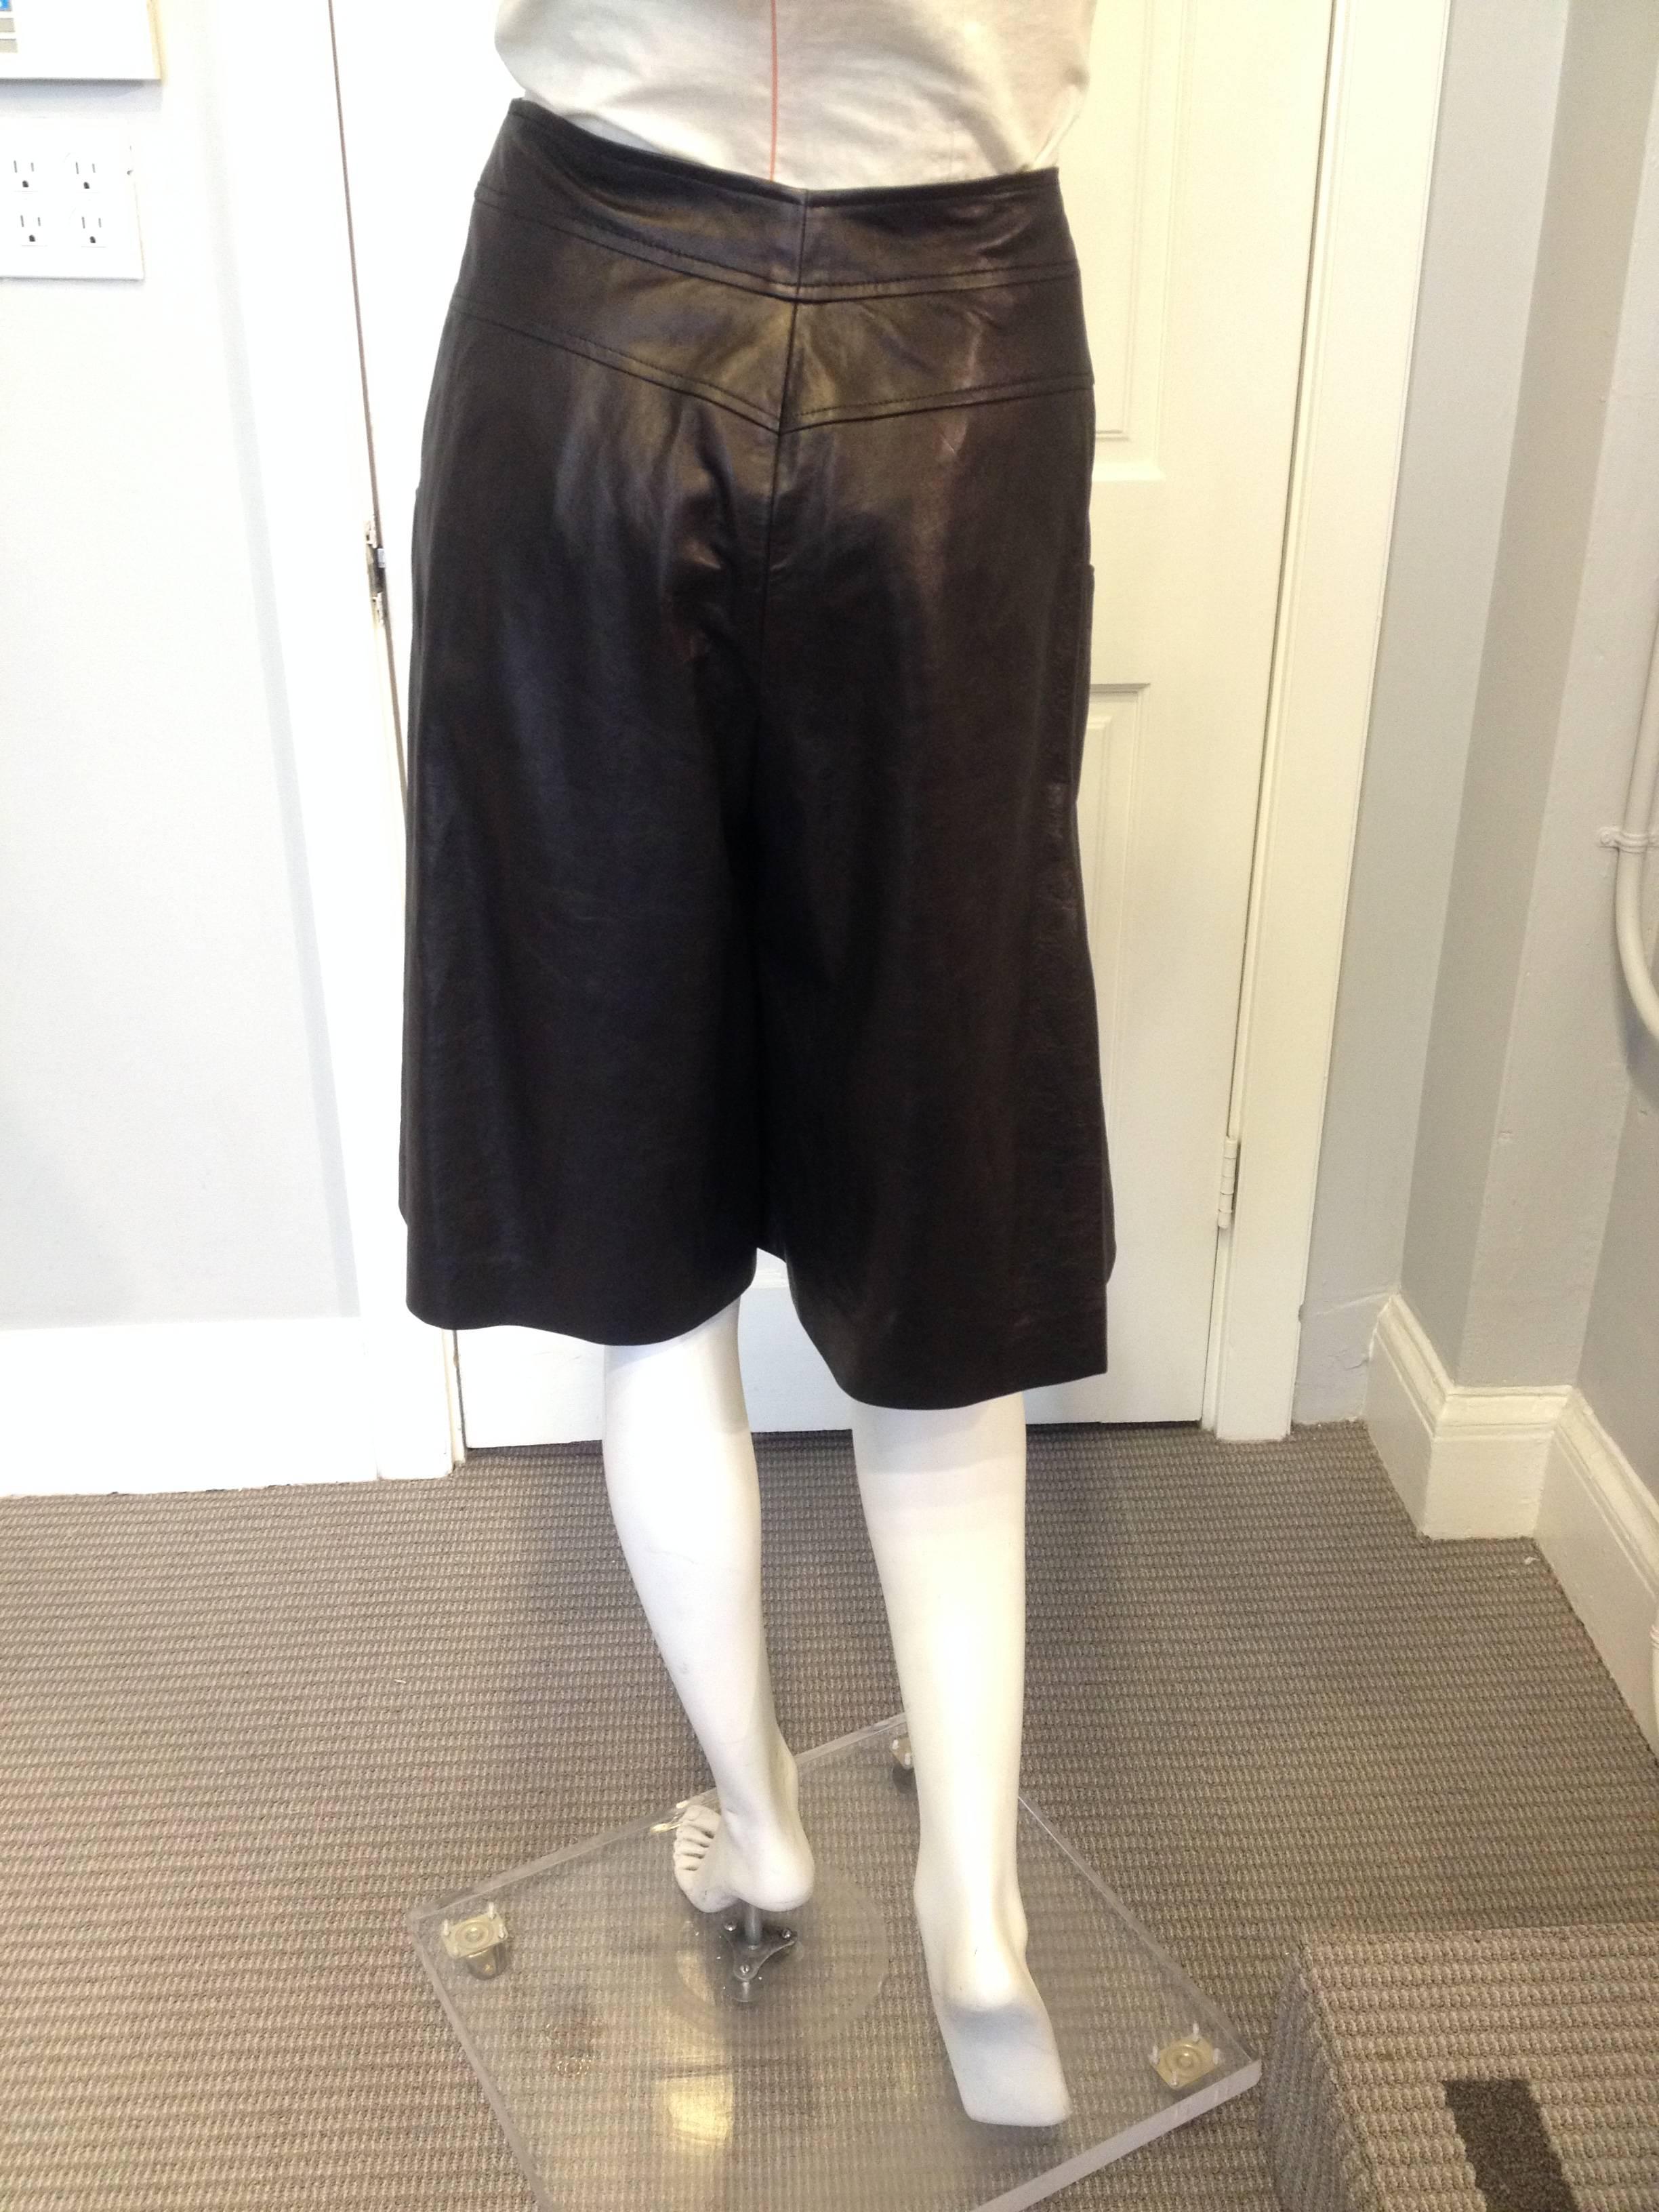 Chanel Black Leather Culottes Size 42 (10) In Excellent Condition For Sale In San Francisco, CA